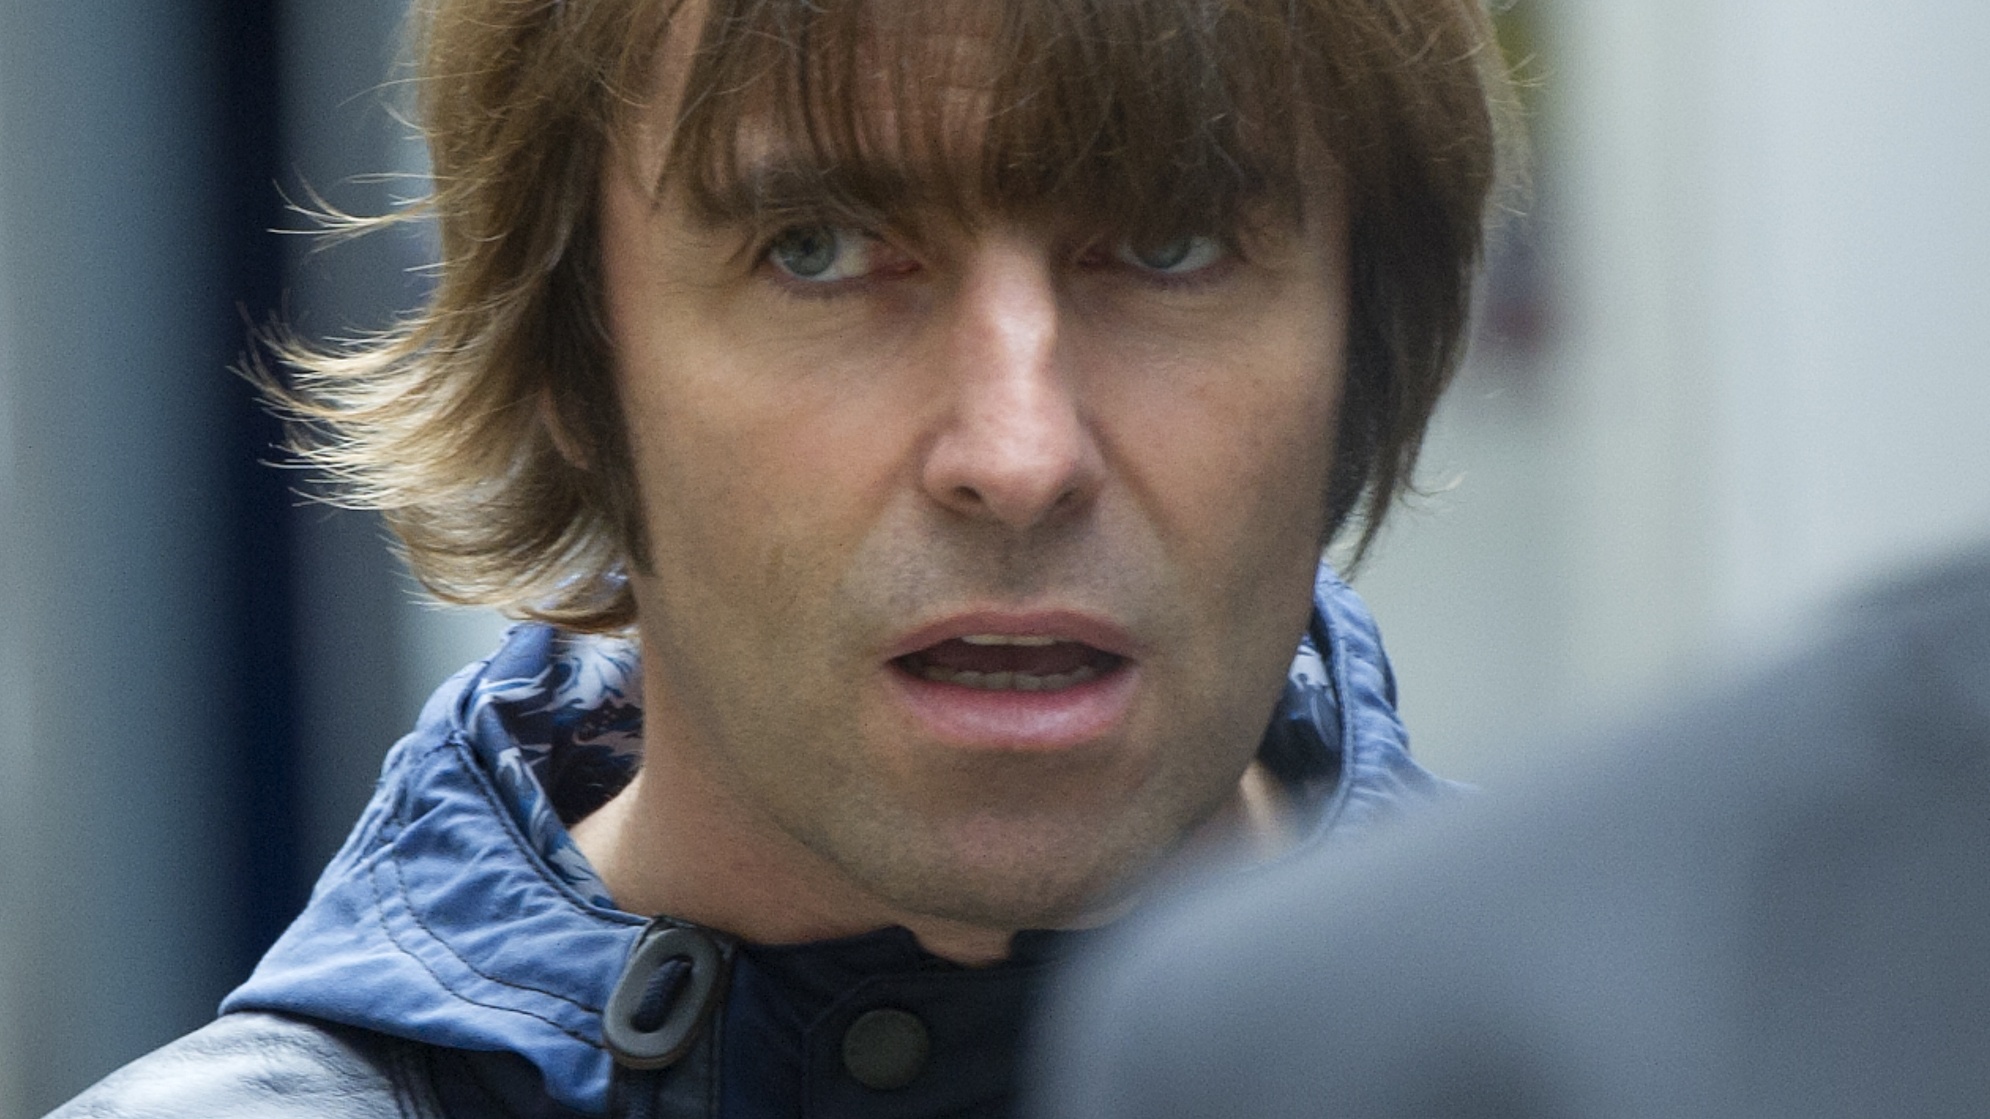 Liam Gallagher in new Twitter rant at 'fake' brother Noel - Bury Times